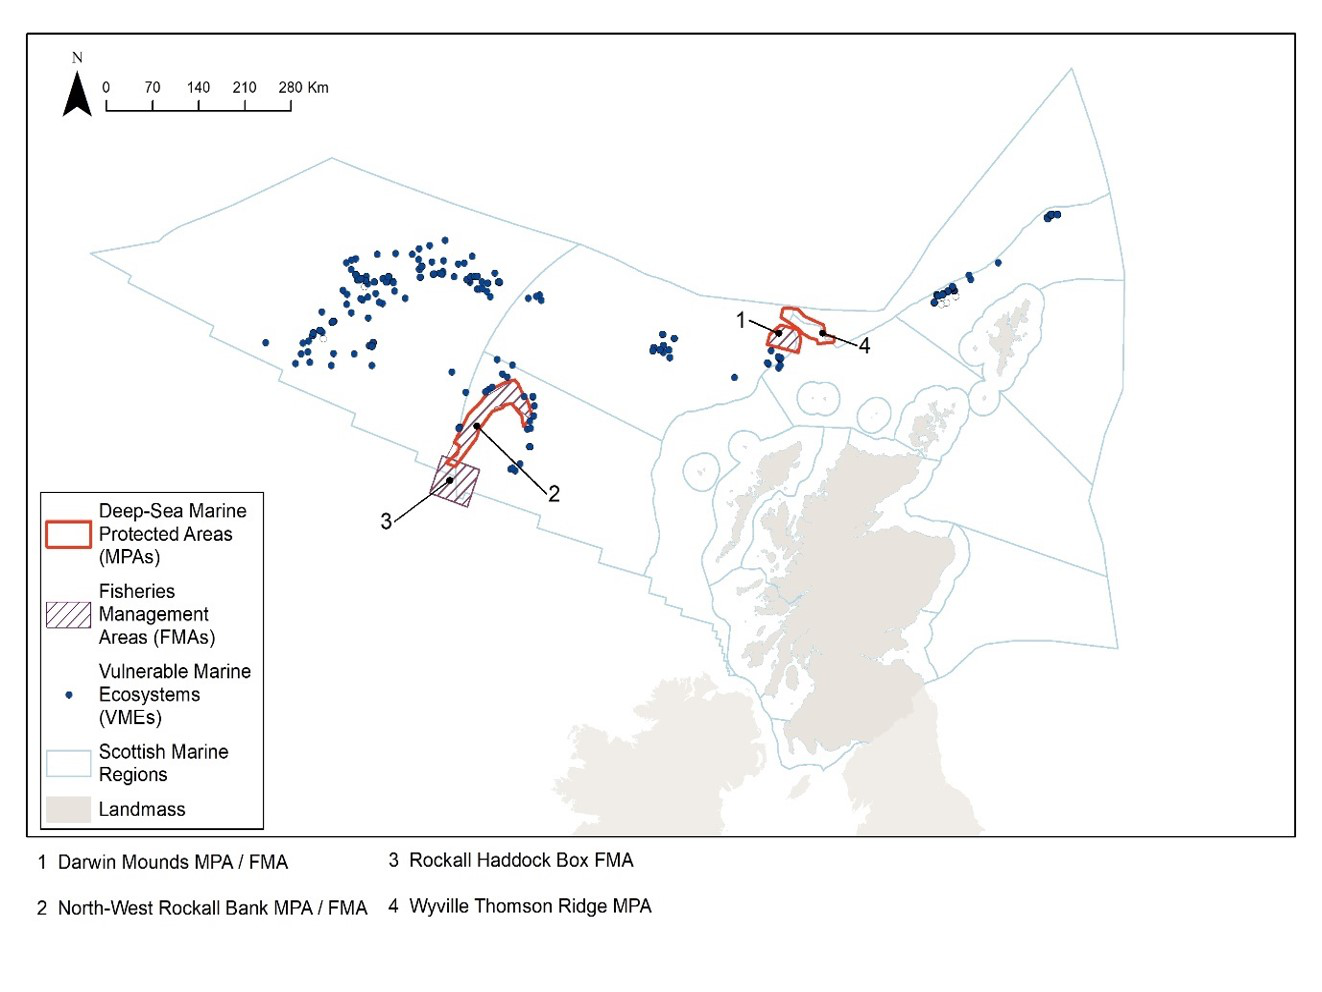 Figure 9. Distribution of Deep-sea Marine Protected Areas (MPAs) and Vulnerable Marine Ecosystems (VMEs) in Scottish waters in 2011 and the Fisheries Management Areas in place.